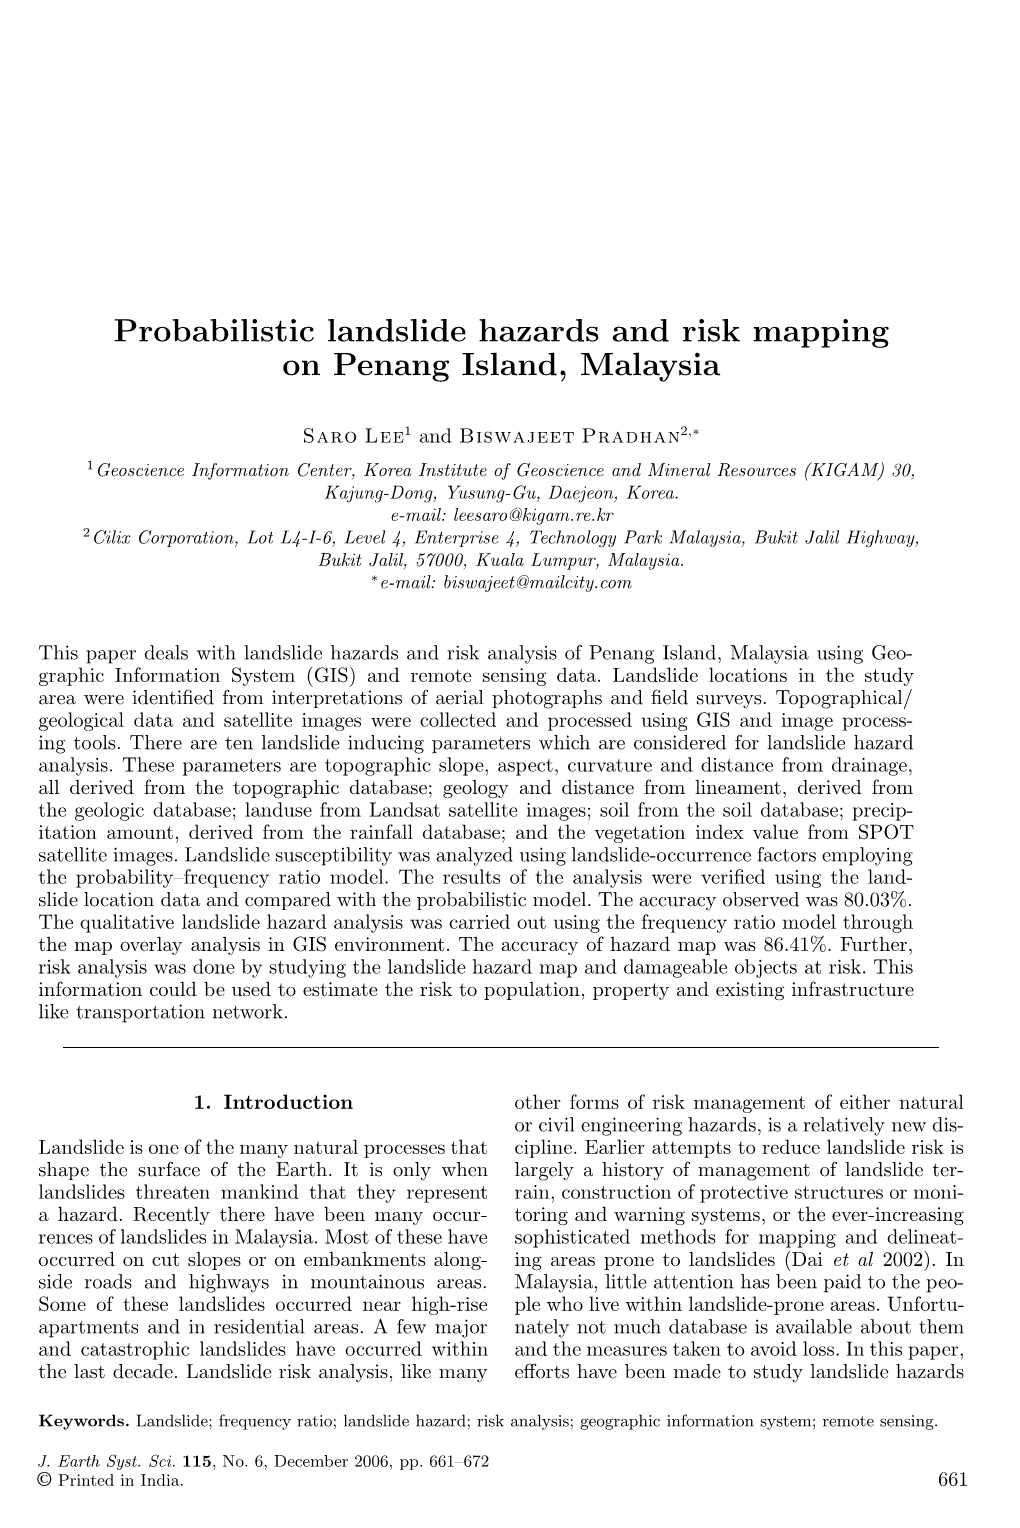 Probabilistic Landslide Hazards and Risk Mapping on Penang Island, Malaysia